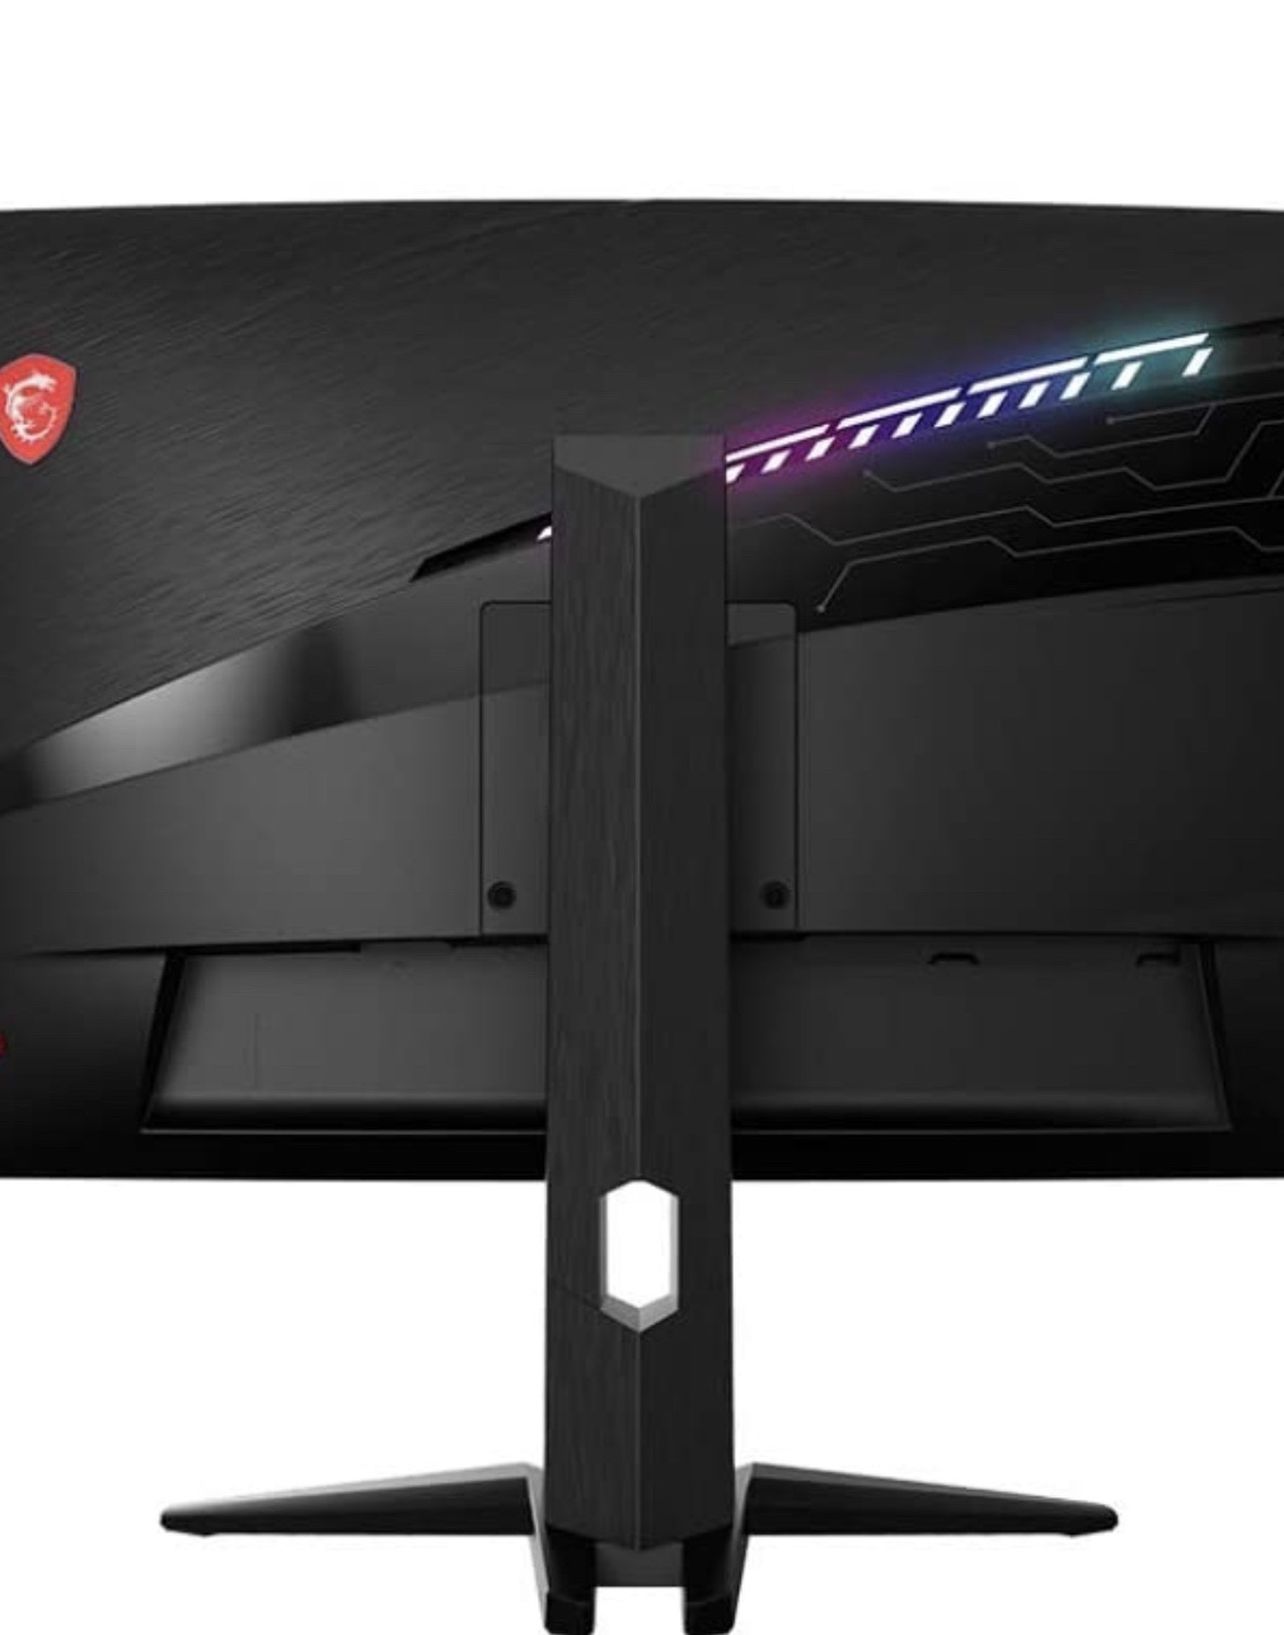 MSI 27” Curved Gaming Monitor 165hz, 1ms, RGB Mystic Lights, PS5 Compatiable HDMI 2.0